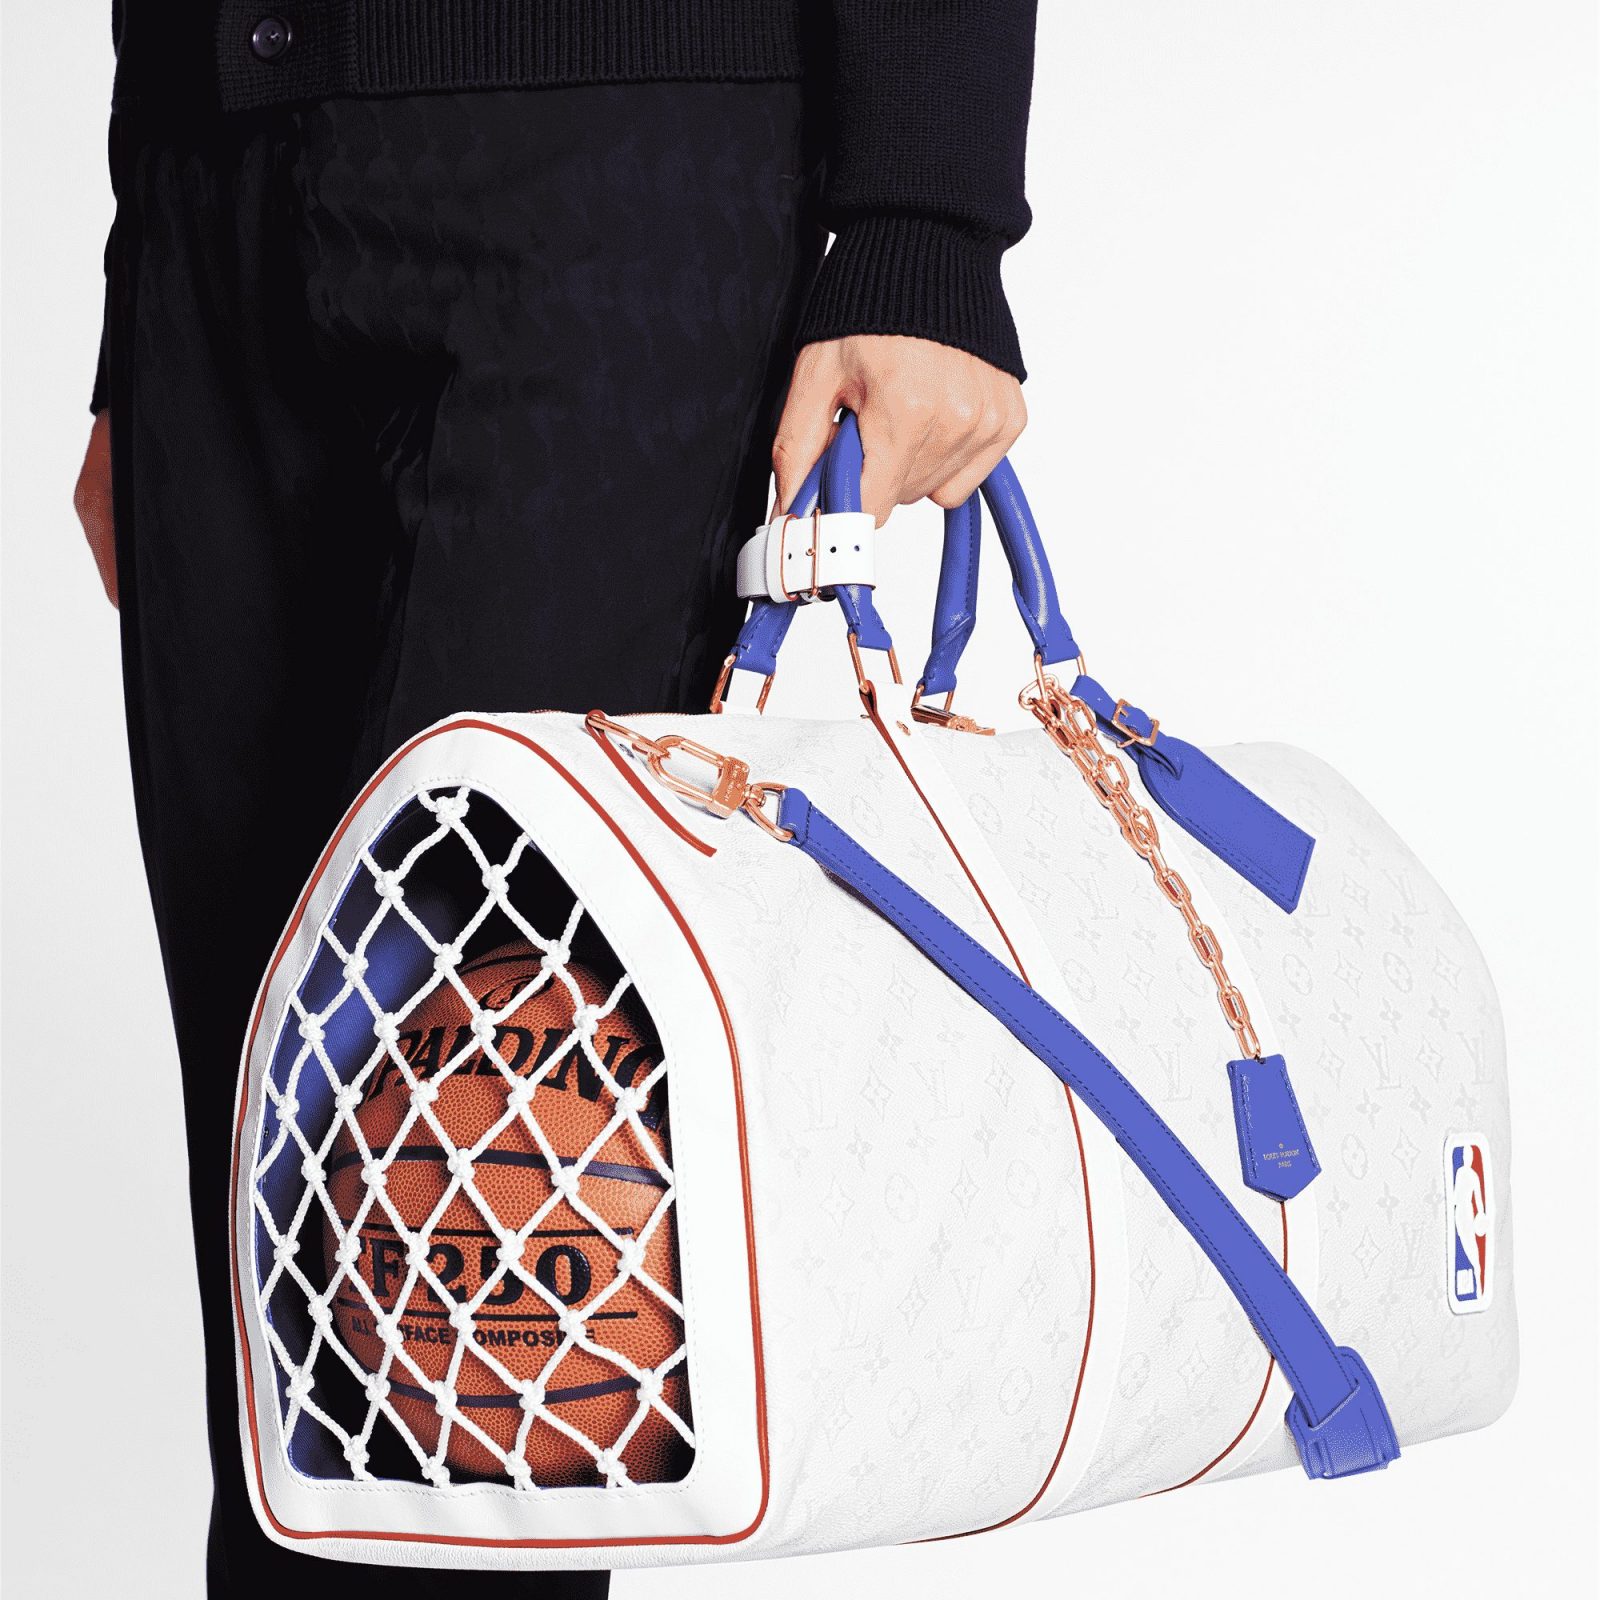 Louis Vuitton on X: Congratulations to the 2020 #NBAFinals Champions. For  the first time, this year's winning team was awarded the @NBA Larry O'Brien  Trophy in a bespoke #LouisVuitton Travel Case. Learn